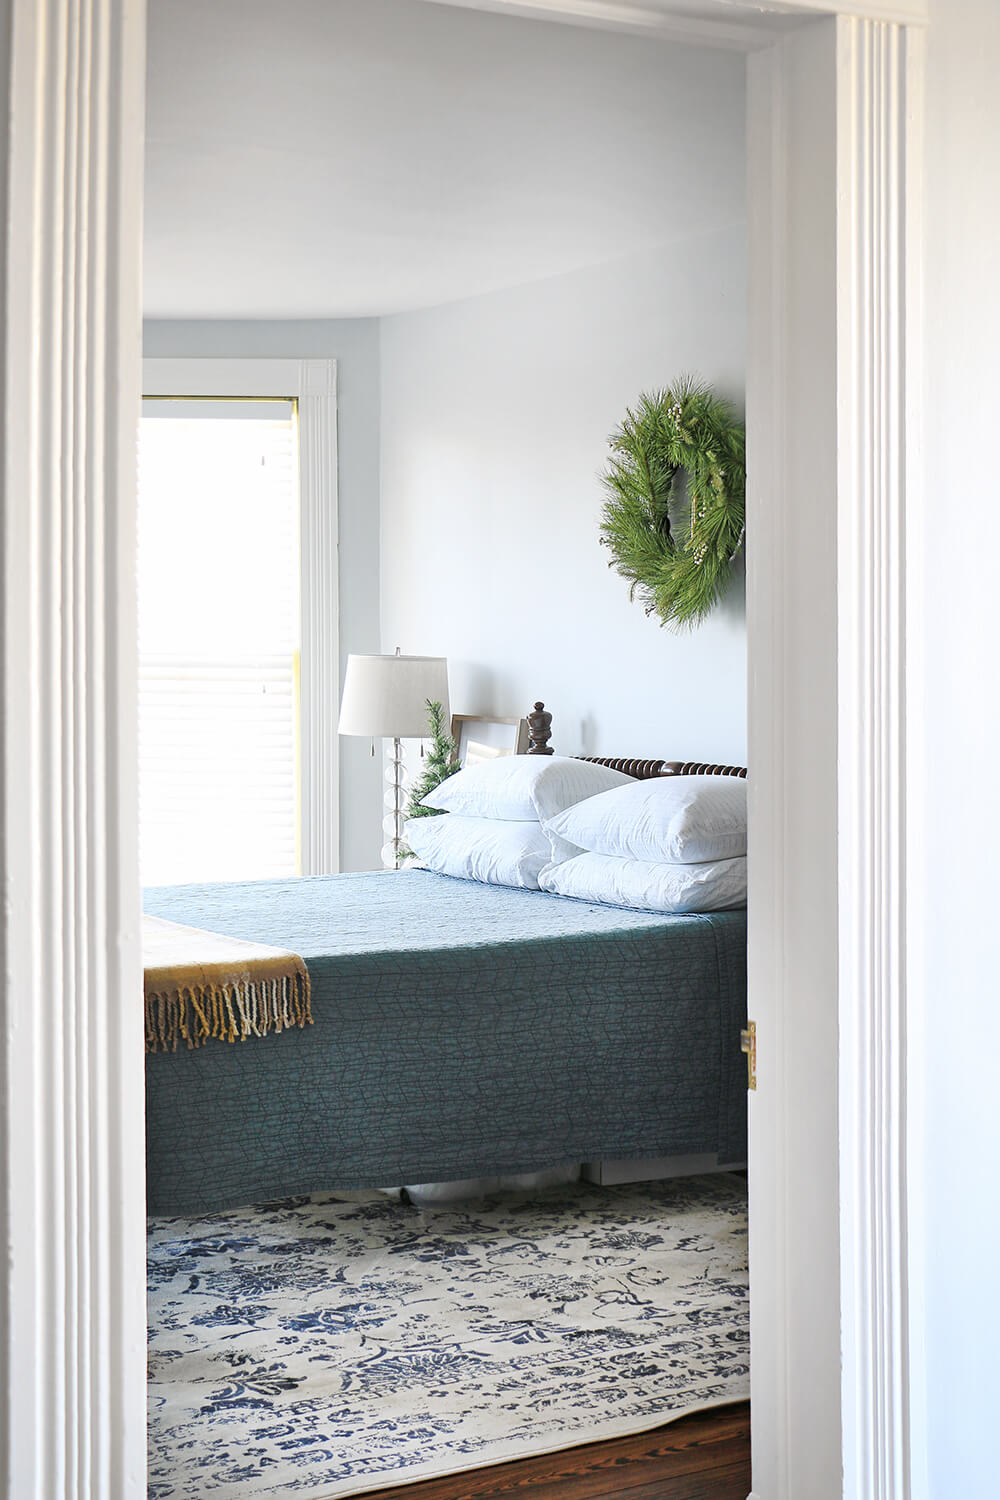 Guest bedroom with wreath